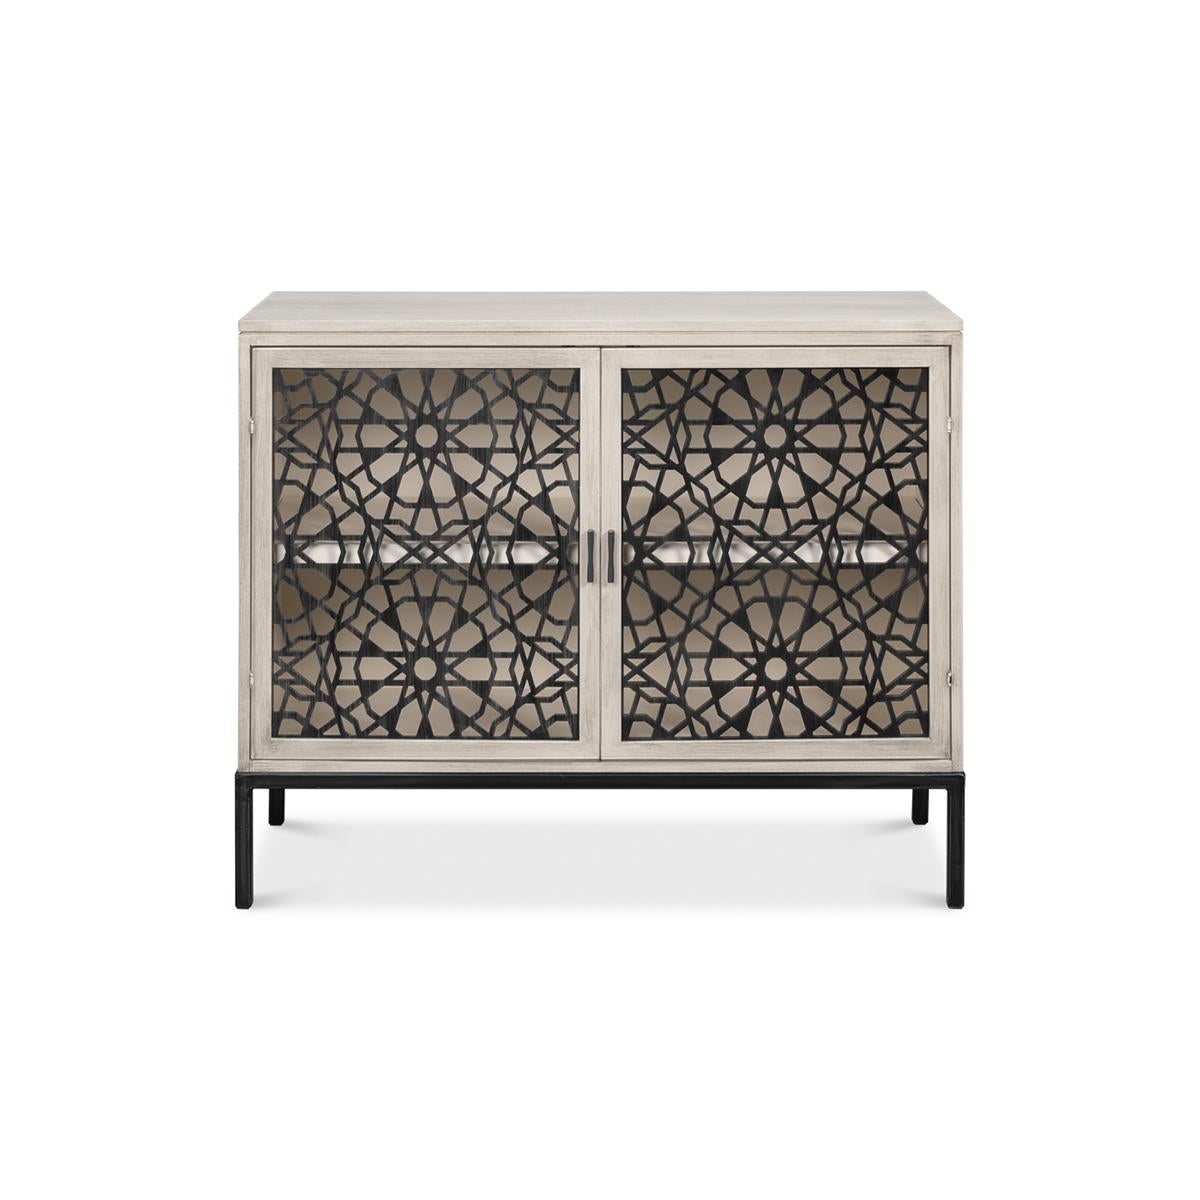 Crafted from the finest materials and hand-finished in a manner that lets the natural beauty of the wood shine through.

Geometric openwork design doors and metal elements accent traditional shapes making them both current and classic.

Dimensions: